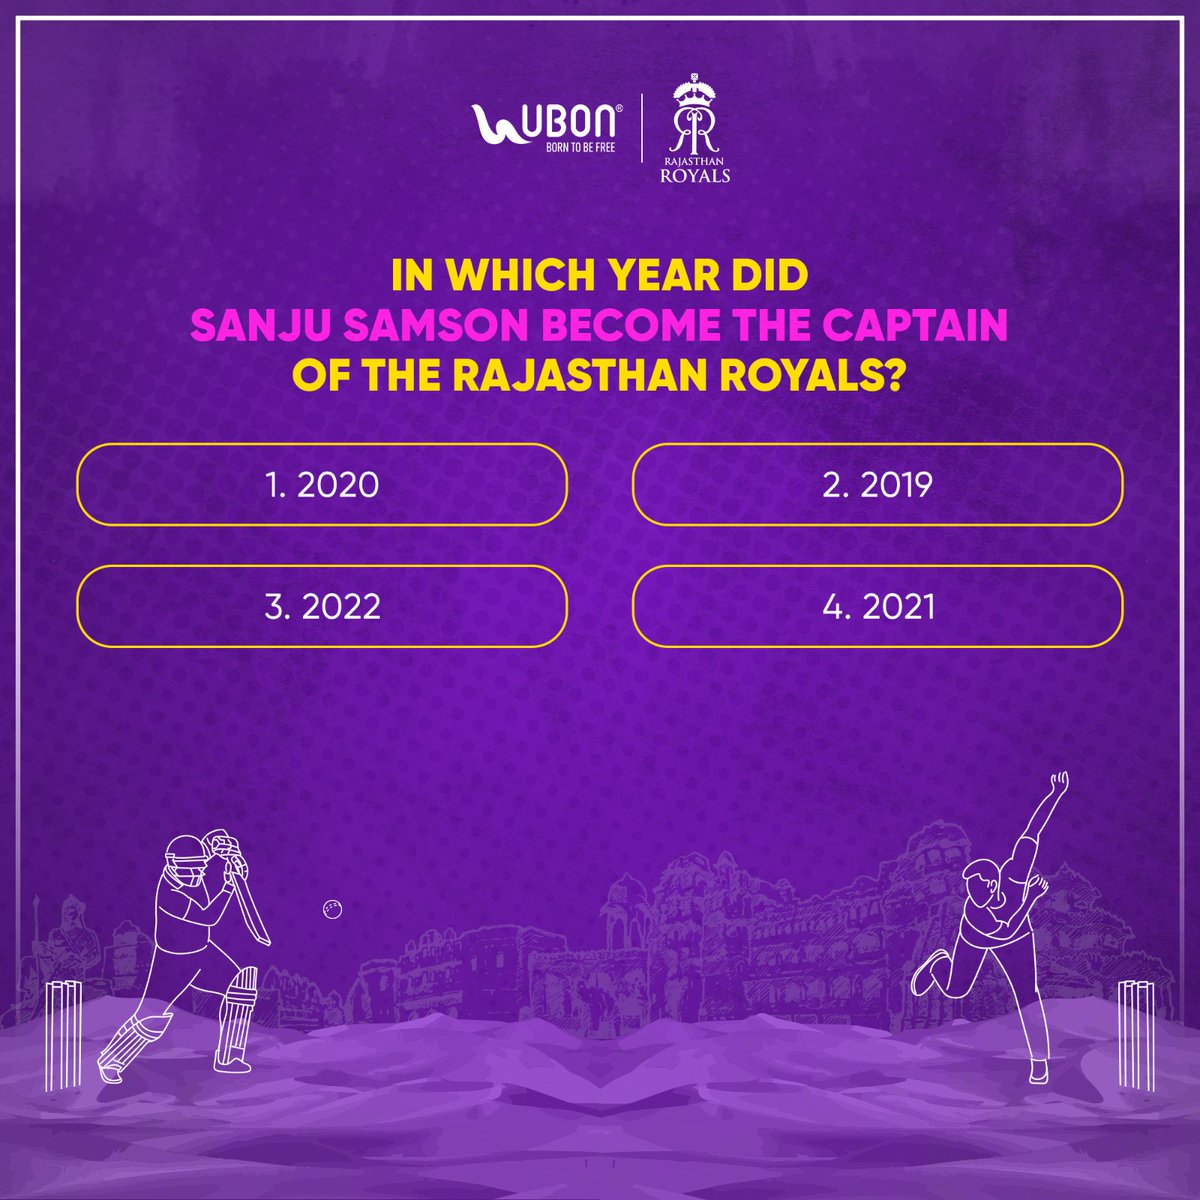 RR x UBON #ContestAlert 🚨 Steps to Participate: 1. Follow @UbonIndia on Twitter 2. Retweet this Tweet and Tag @UbonIndia 3. Comment your answer below and use #SarChadGayaHaiUtregaNahi